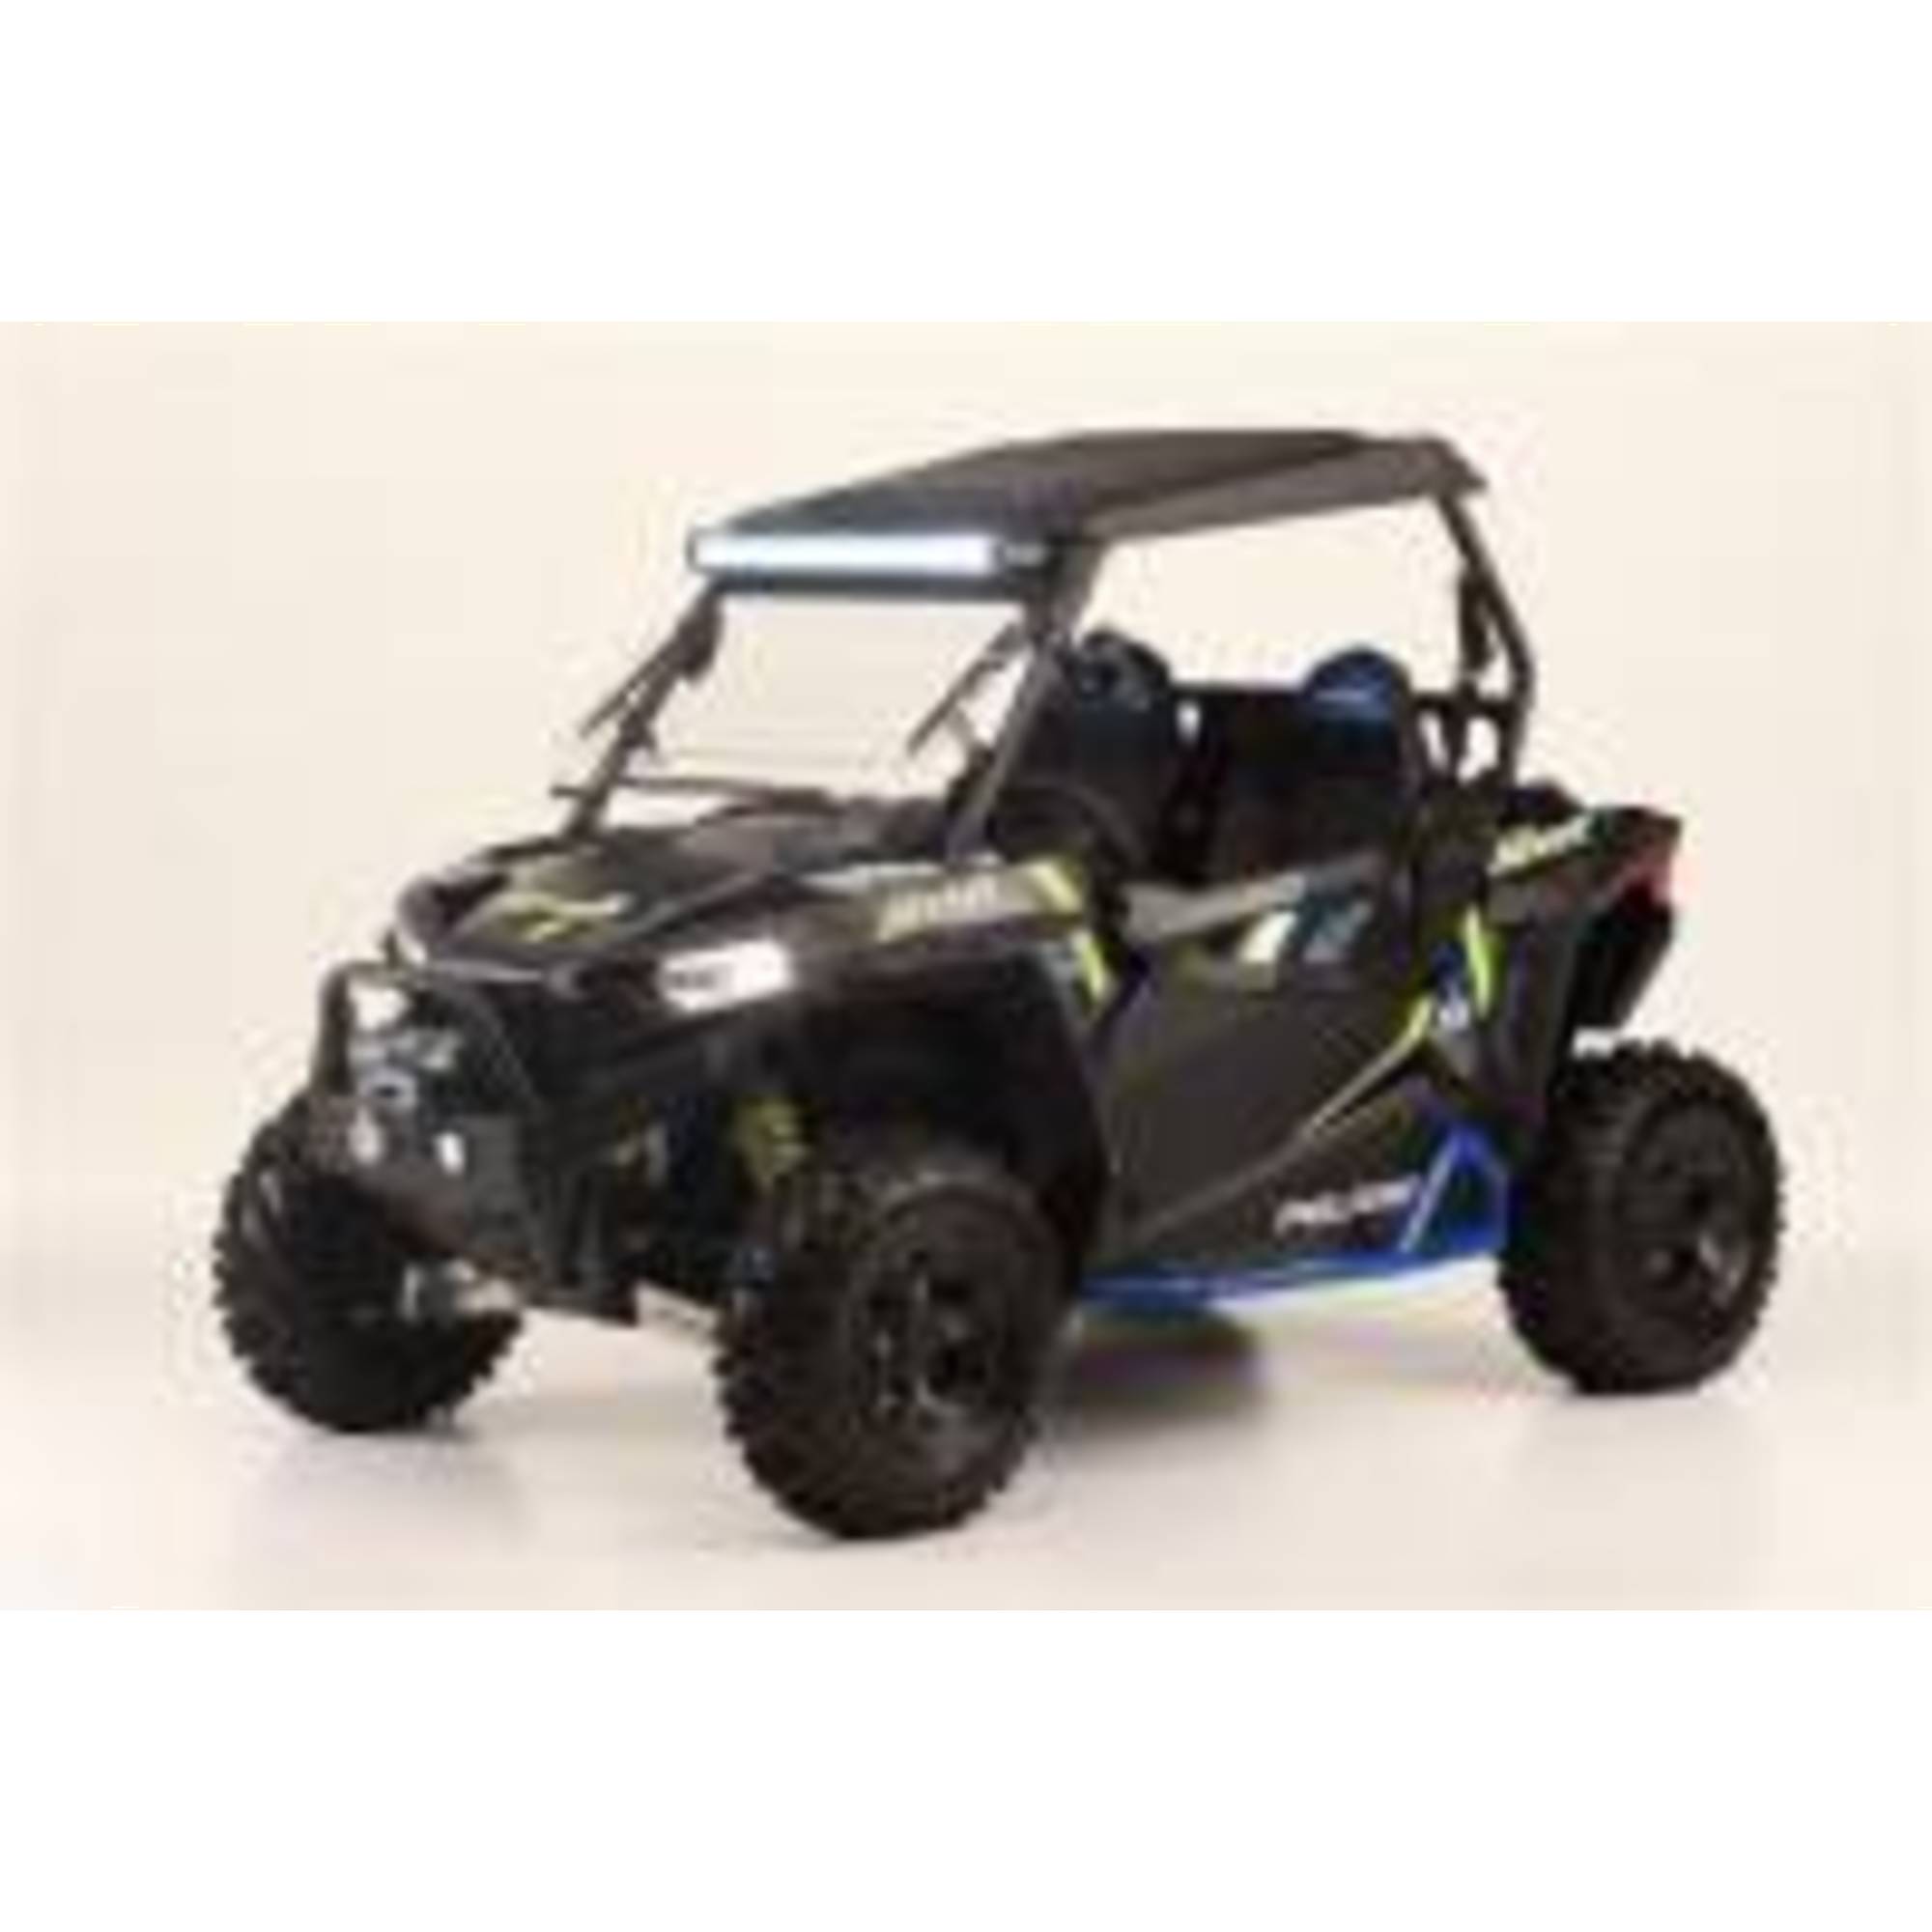 "Extreme Metal Products, Polaris RZR ""Cooter Brown"" Top, Capacity 0 lb, Model 12666"